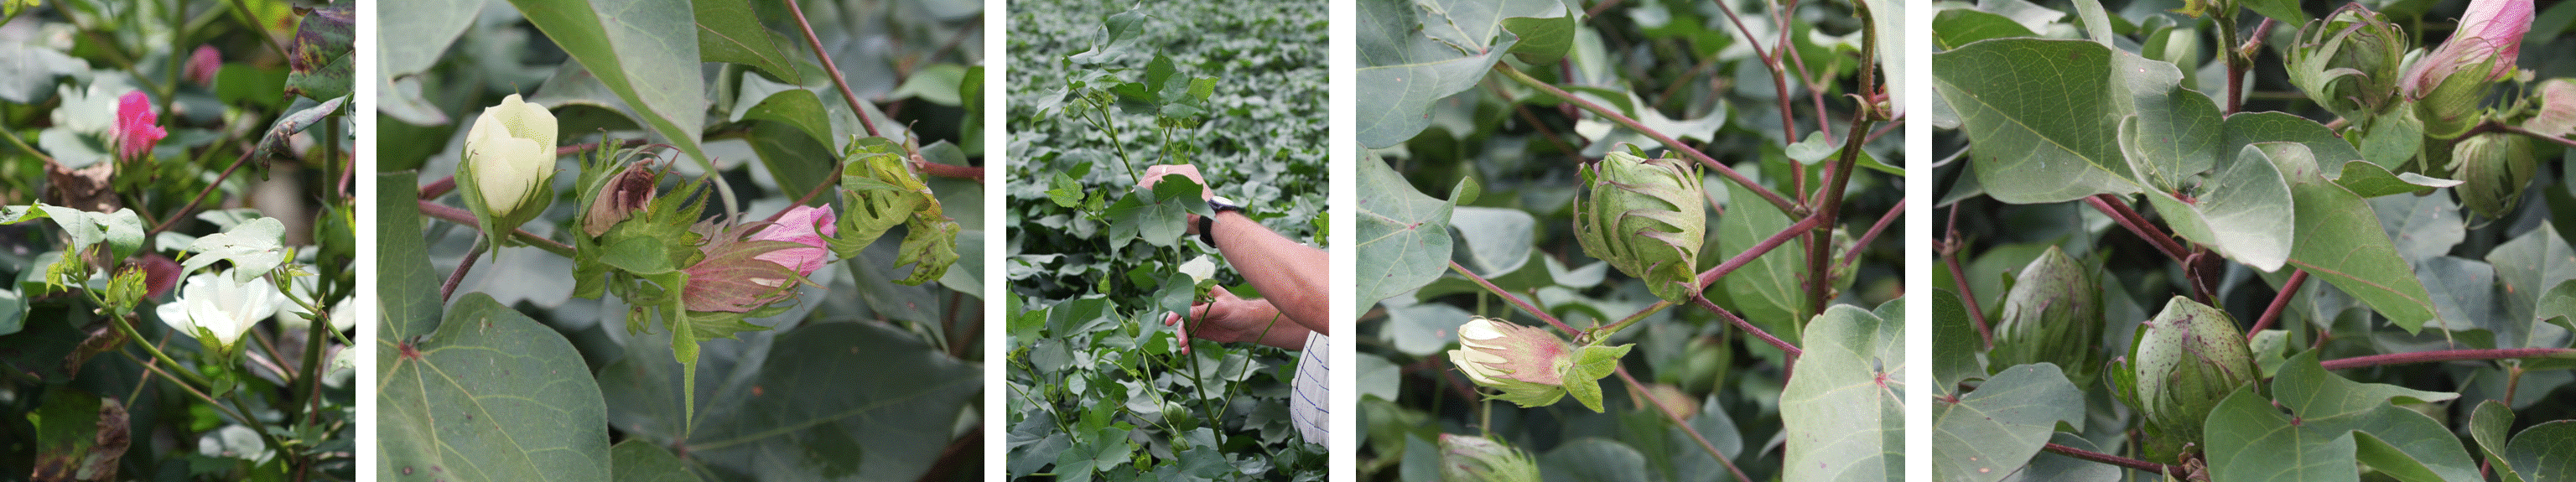 cotton-during-fruiting